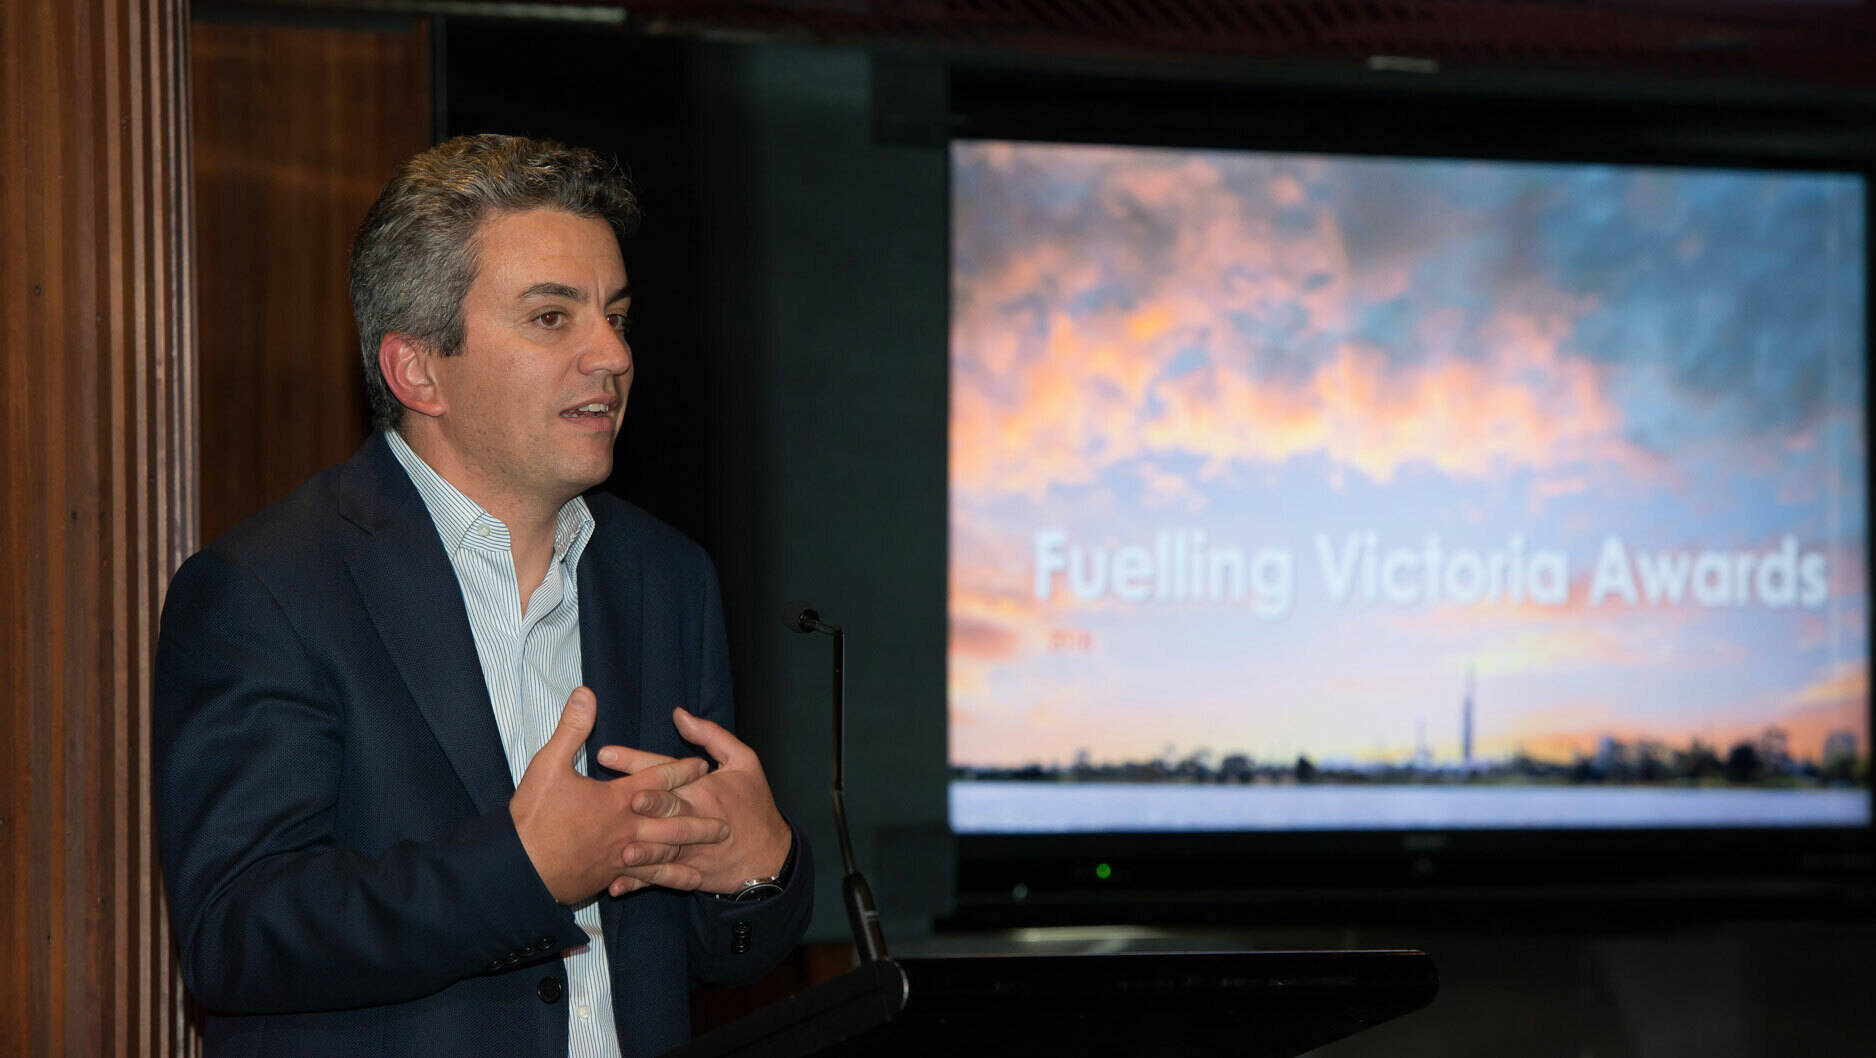 Image Photo— Altona Refinery Manager Riccardo Cavallo addresses attendees at the 2018 Fuelling Victoria awards.